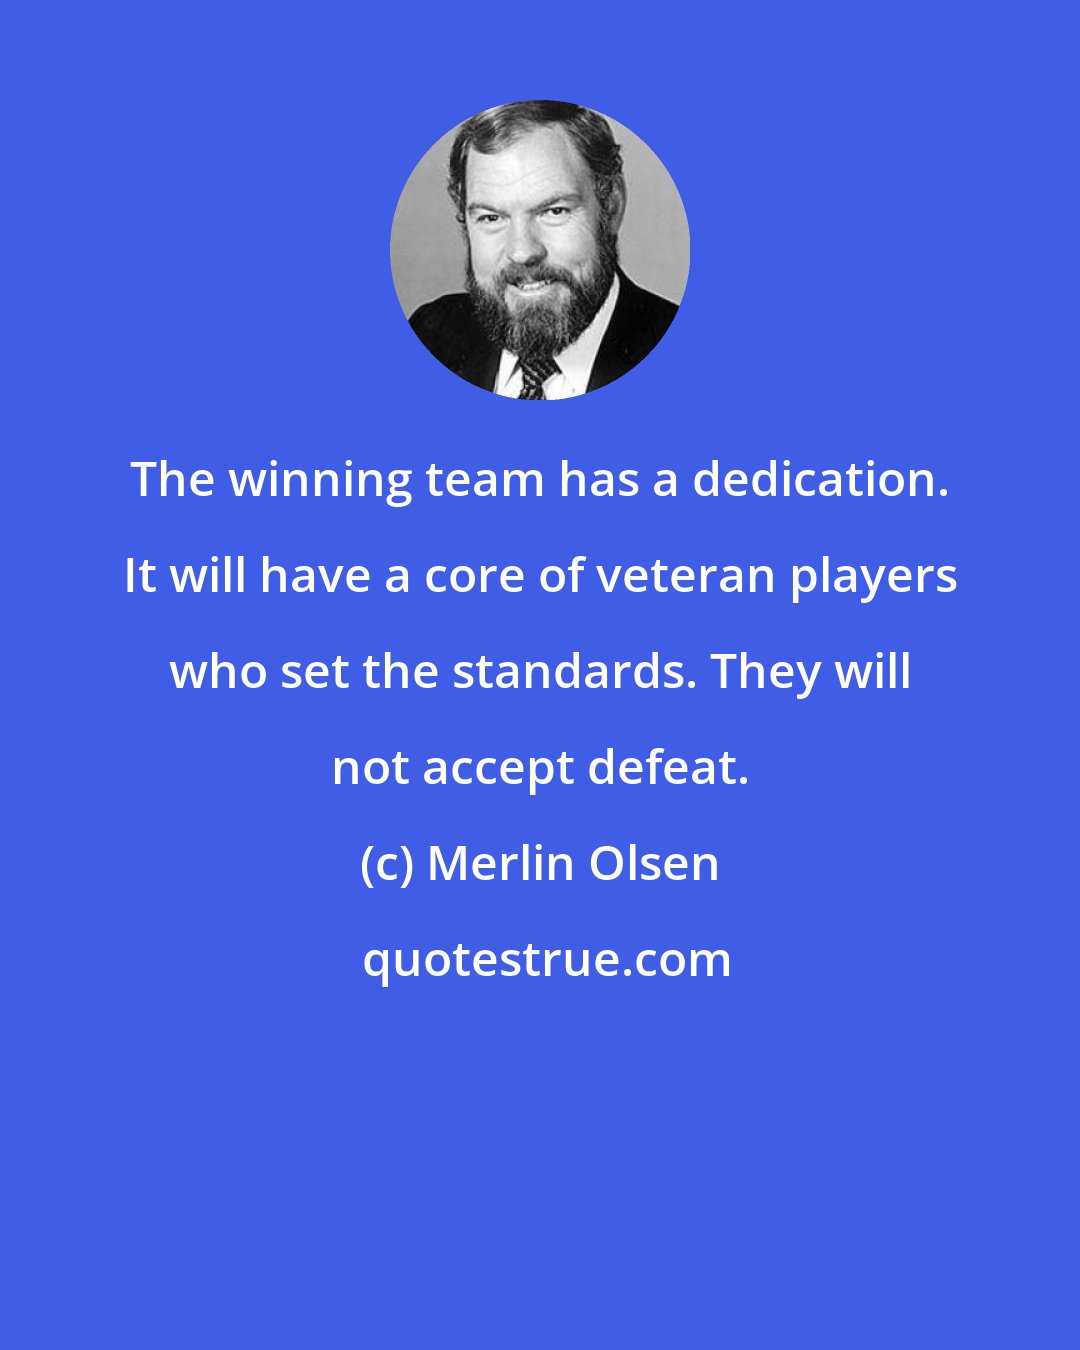 Merlin Olsen: The winning team has a dedication. It will have a core of veteran players who set the standards. They will not accept defeat.